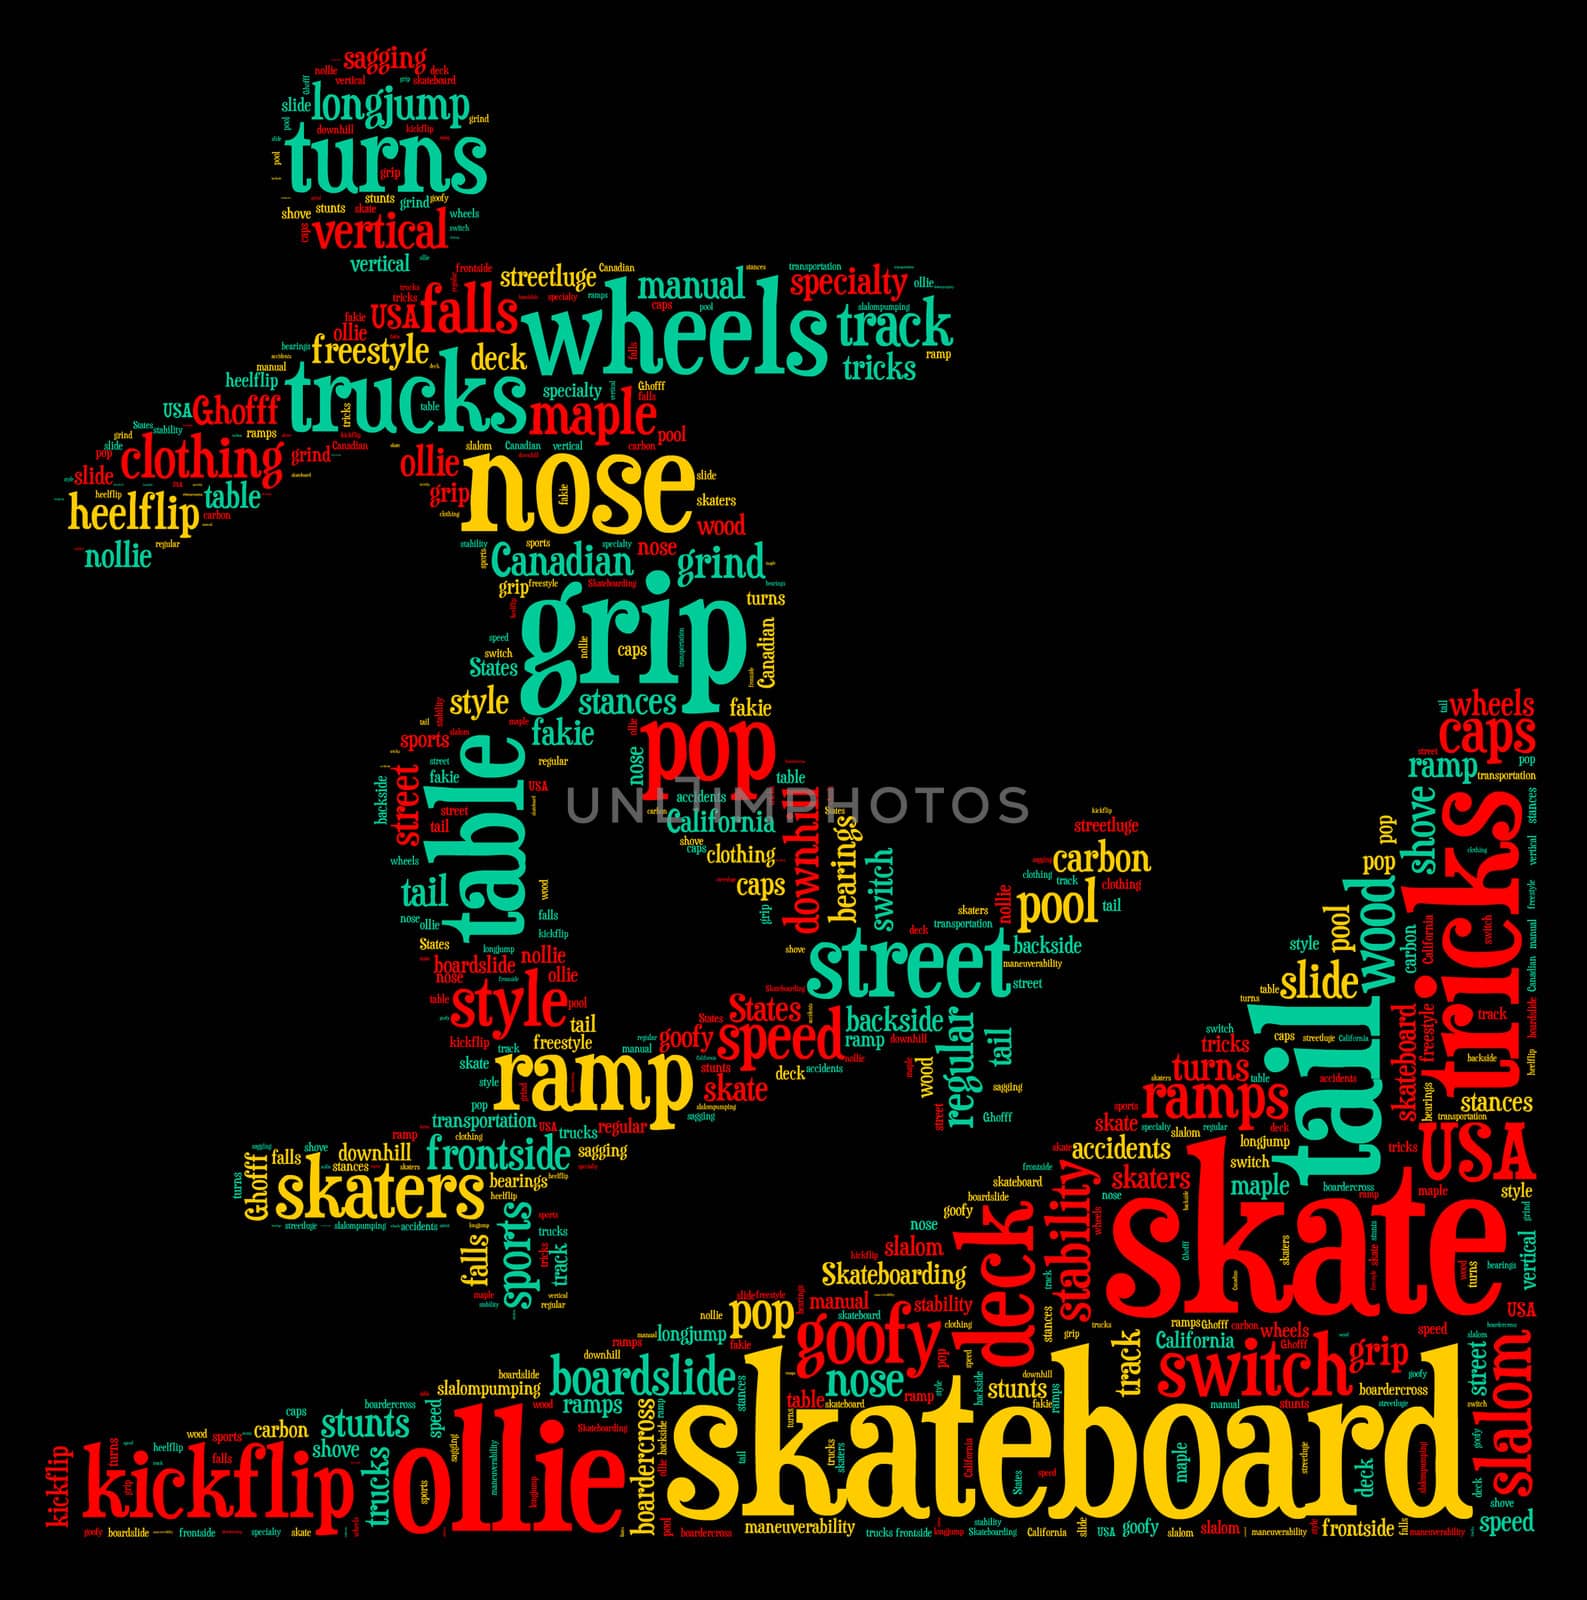 Skateboarder tag cloud illustration by lifeinapixel